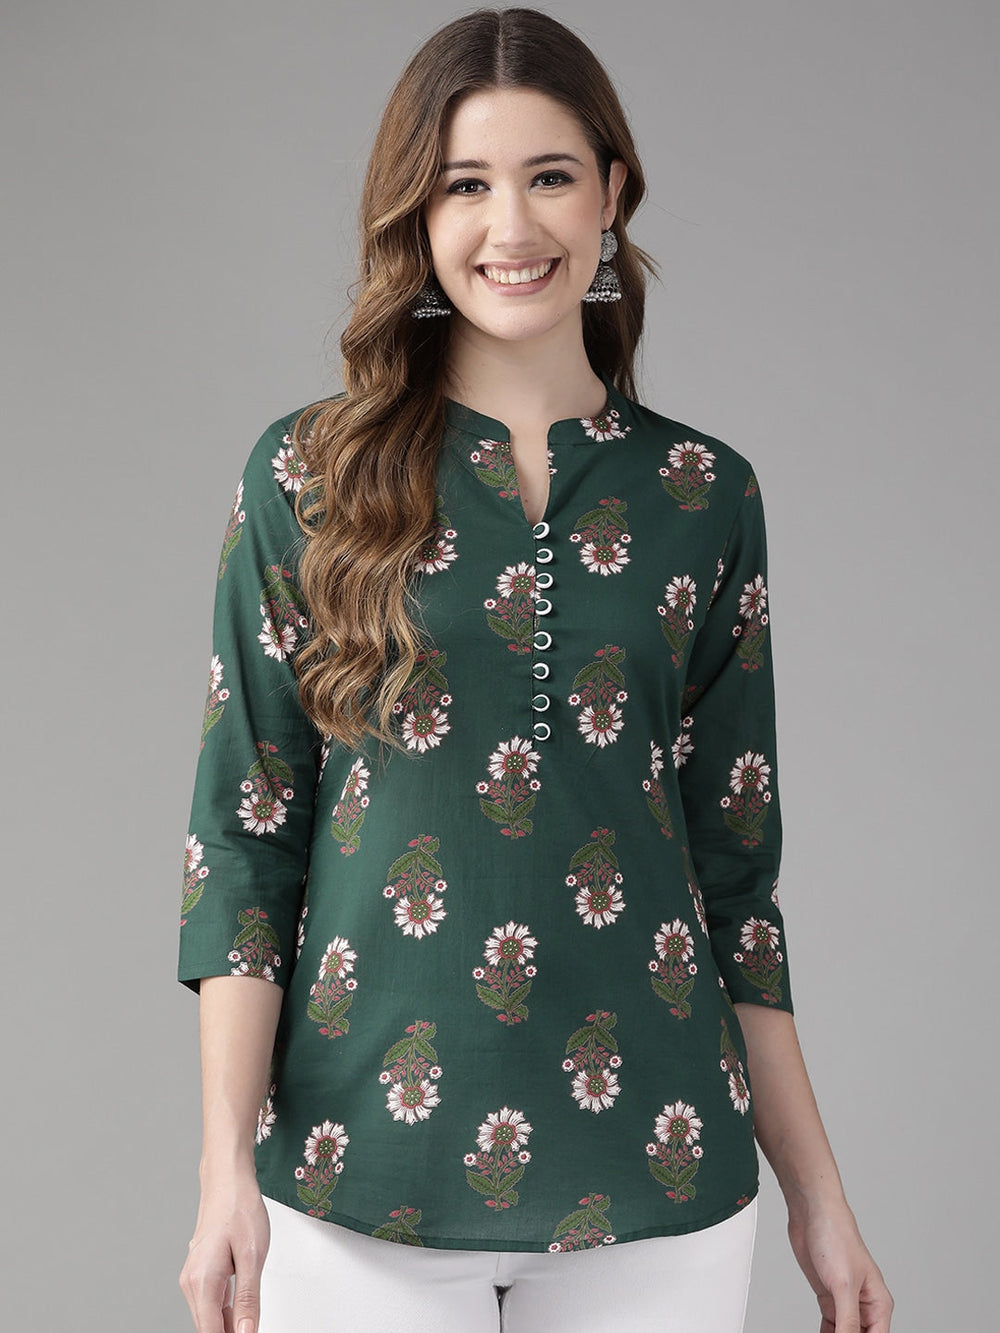 Green Floral Printed Top-Yufta Store-9650TOPGRXS